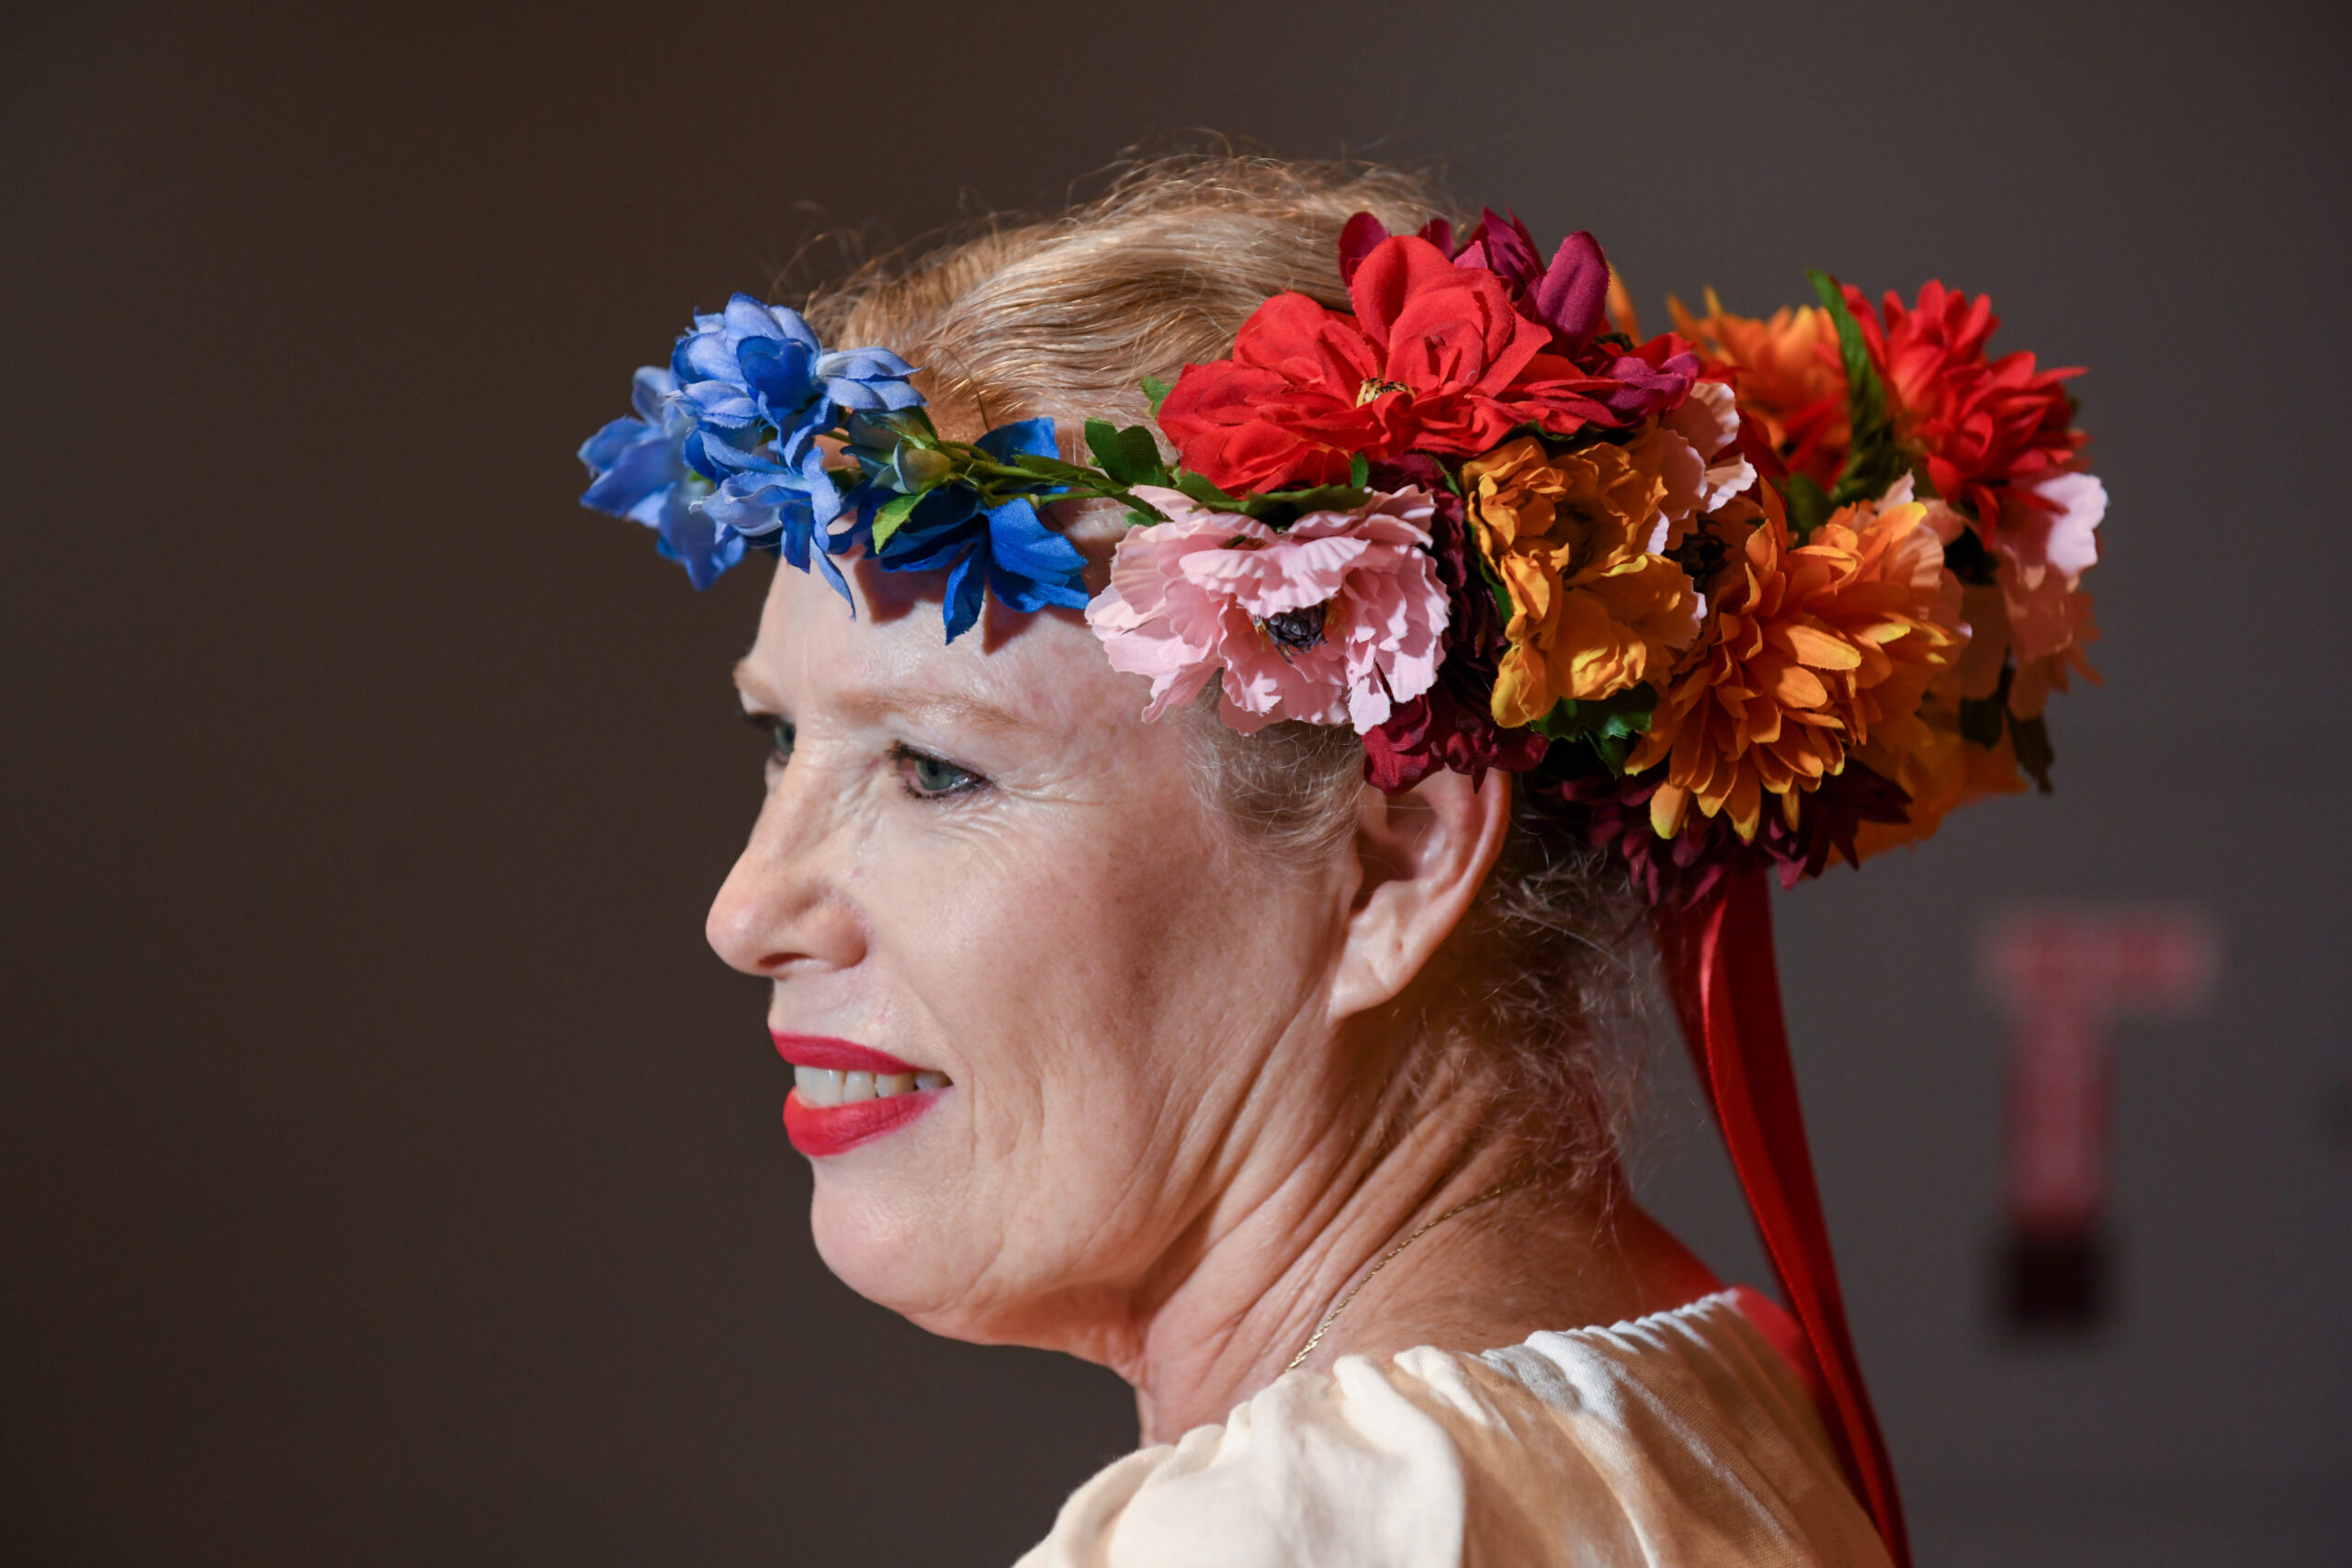 Donna wears a colorful flower headband and looks over her shoulder.